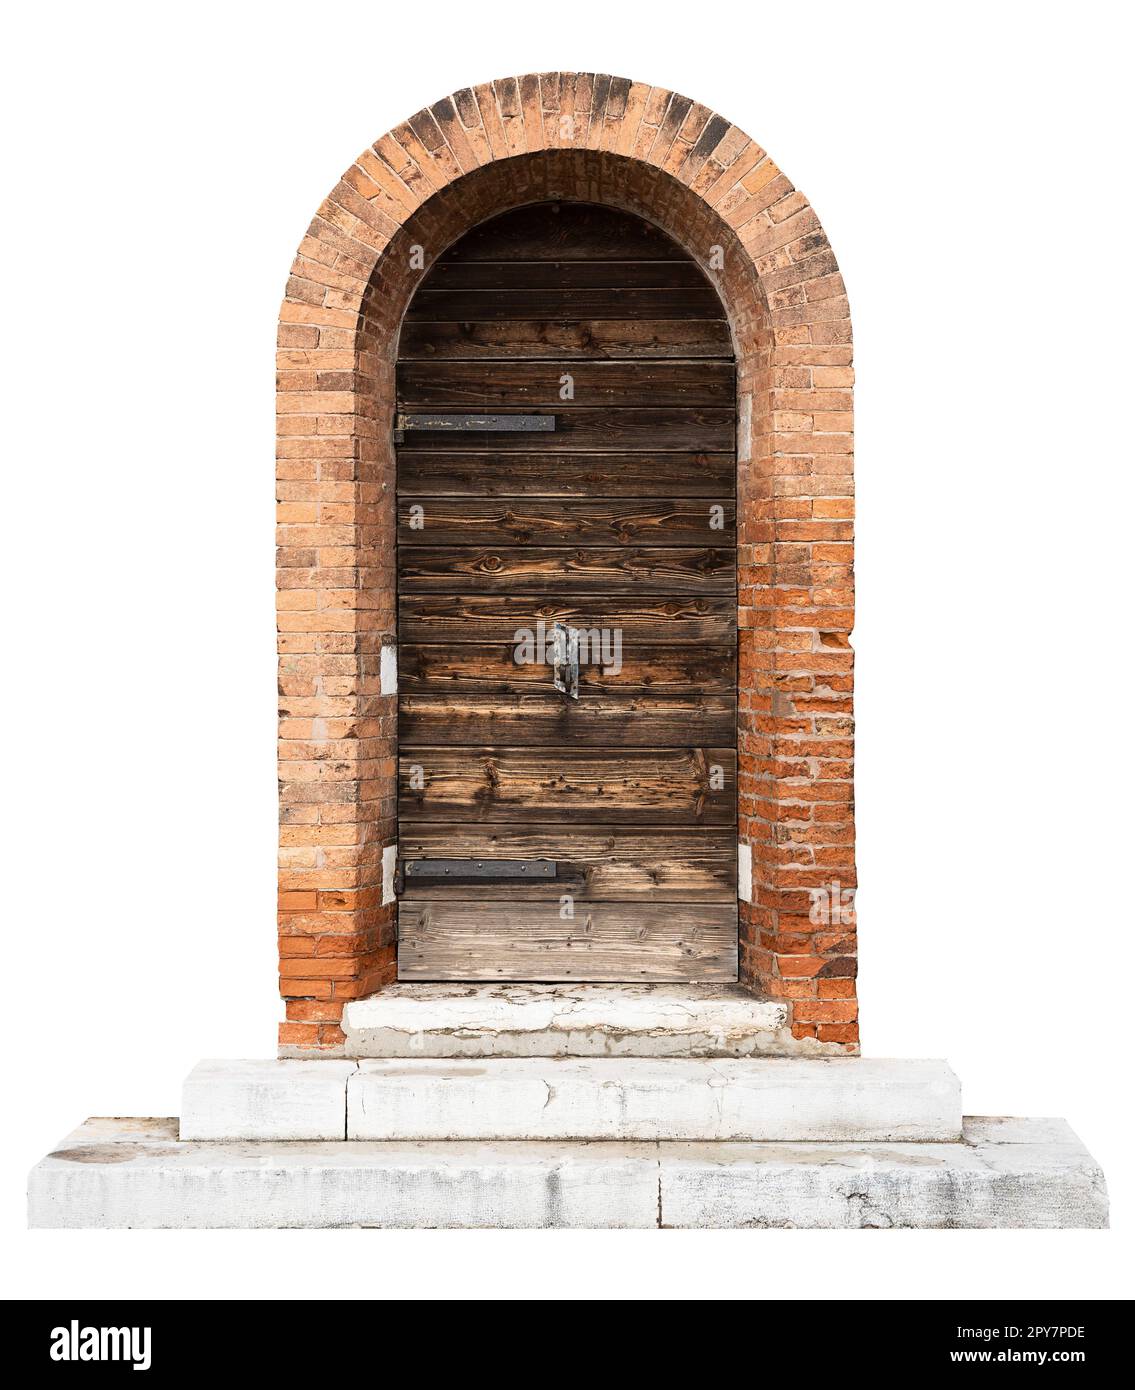 vintage wooden doors with classic brick pattern archway and wide marble stone stairs isolated on white Stock Photo